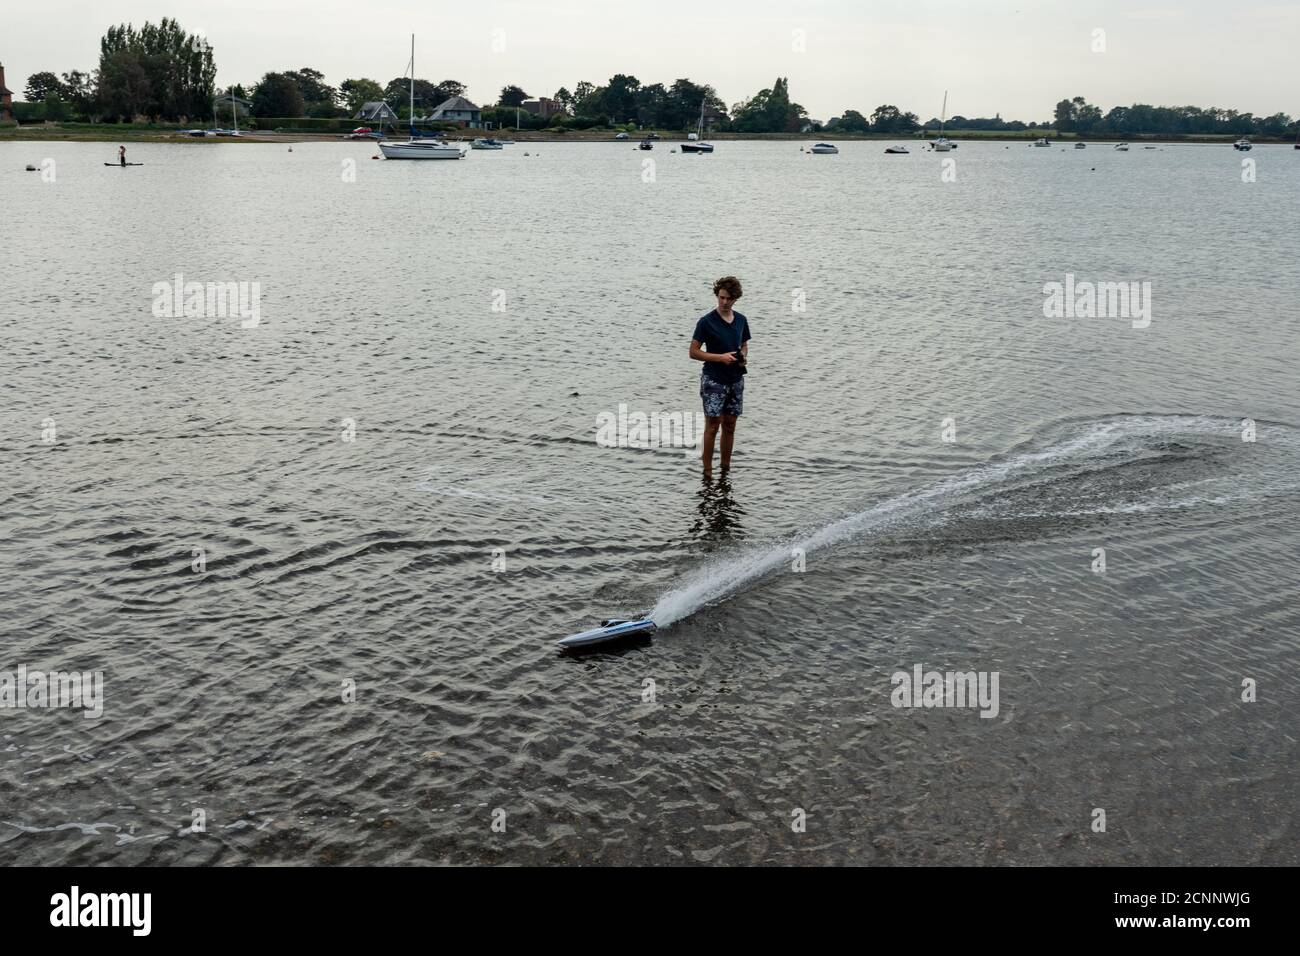 Young man standing in shallow sea water playing with a remote controlled model boat Stock Photo